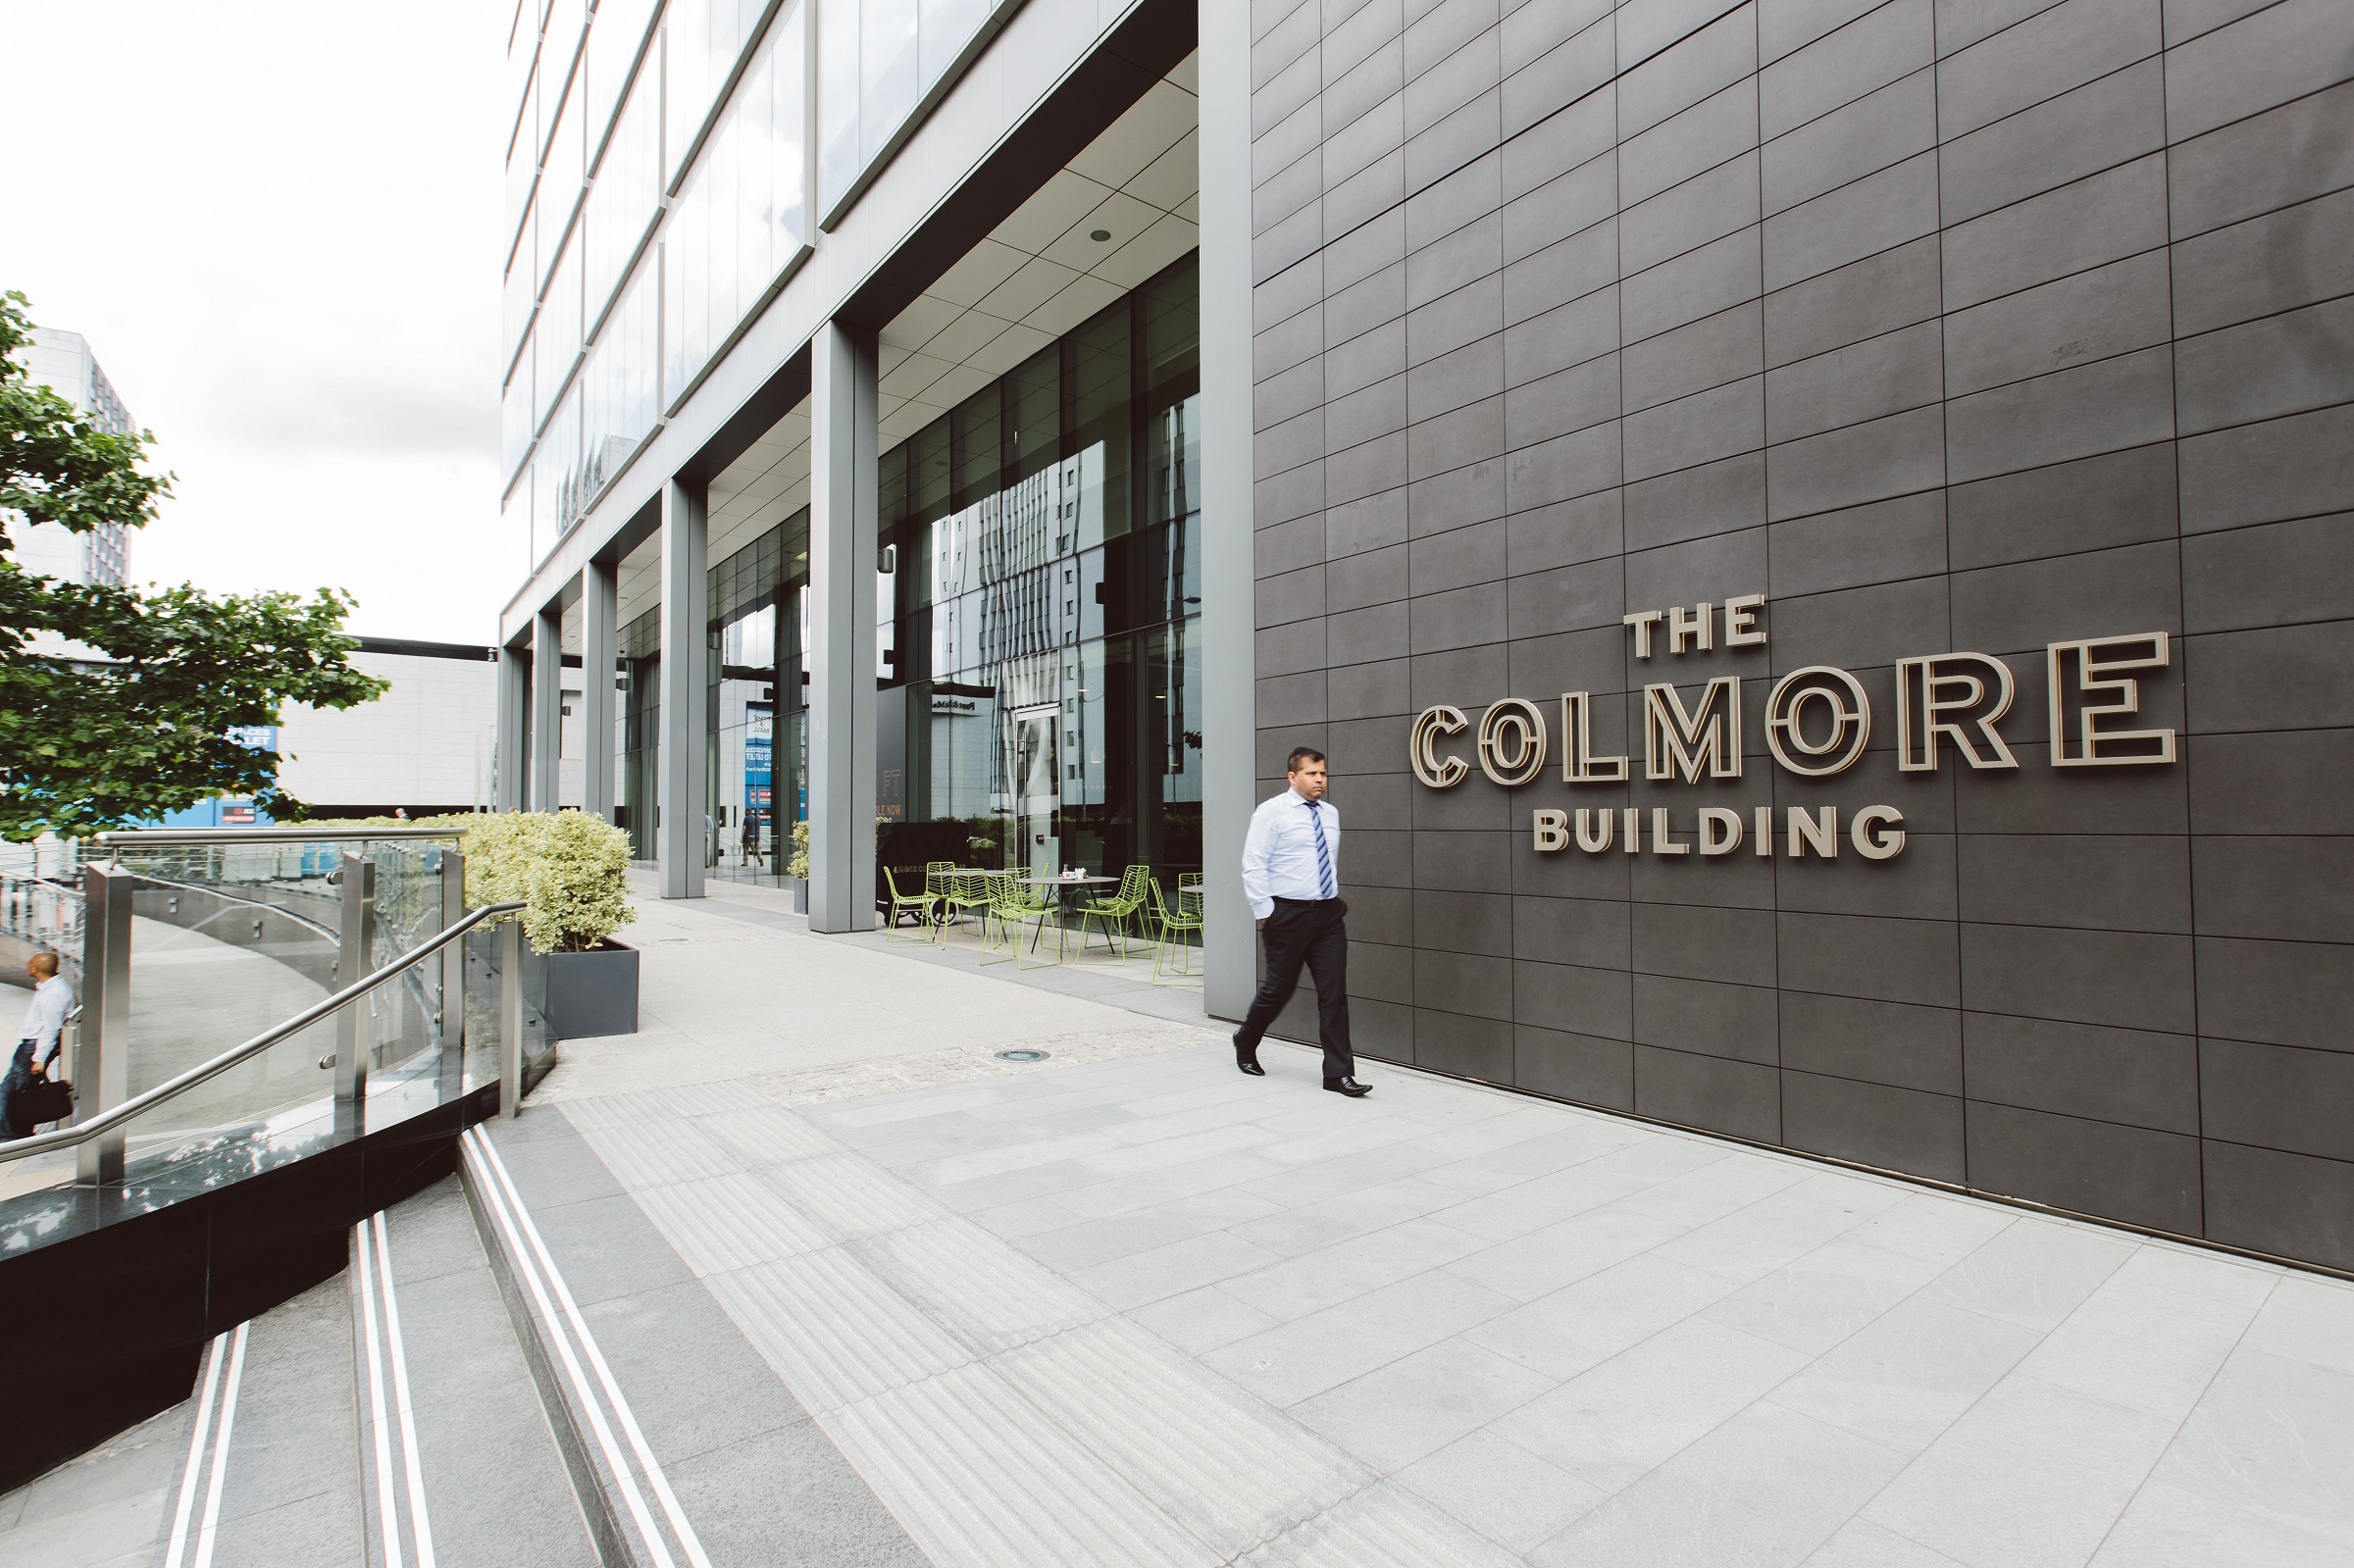 The Colmore Building